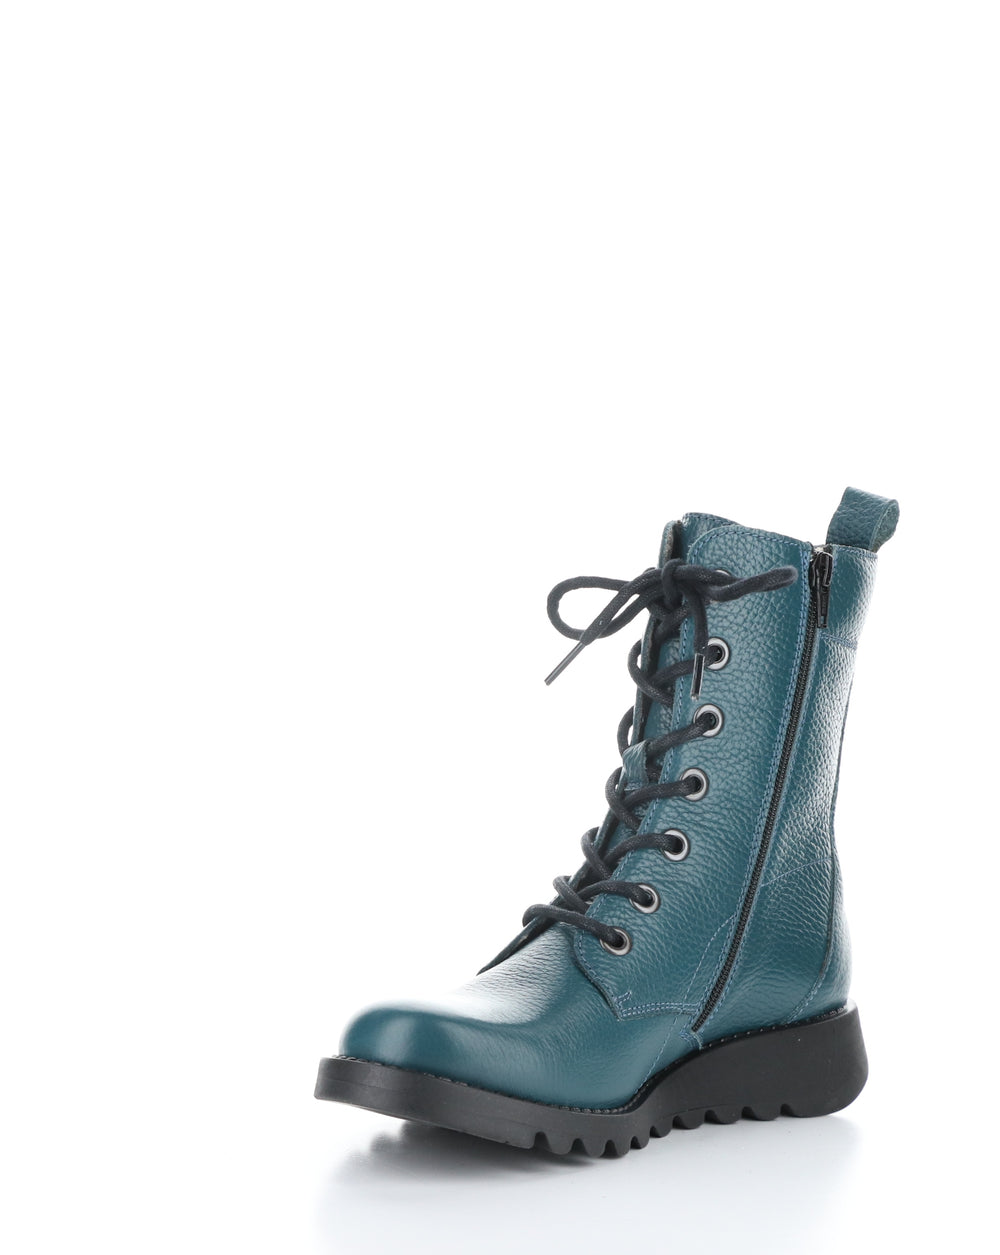 SILF015FLY 007 TEAL Round Toe Boots